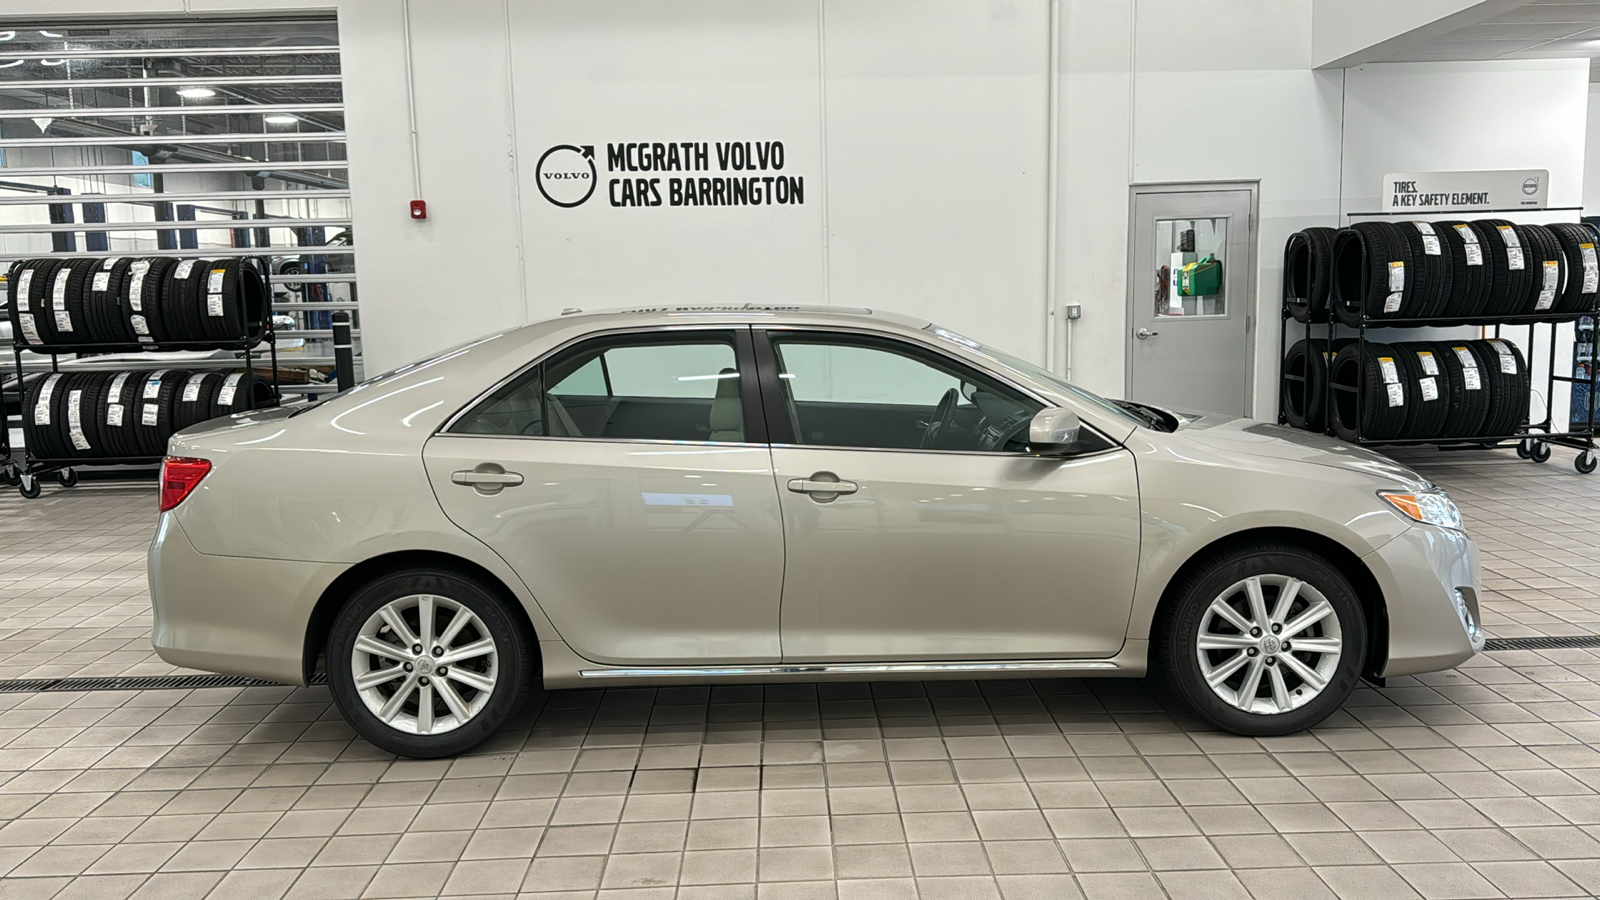 2014 Toyota Camry XLE 4